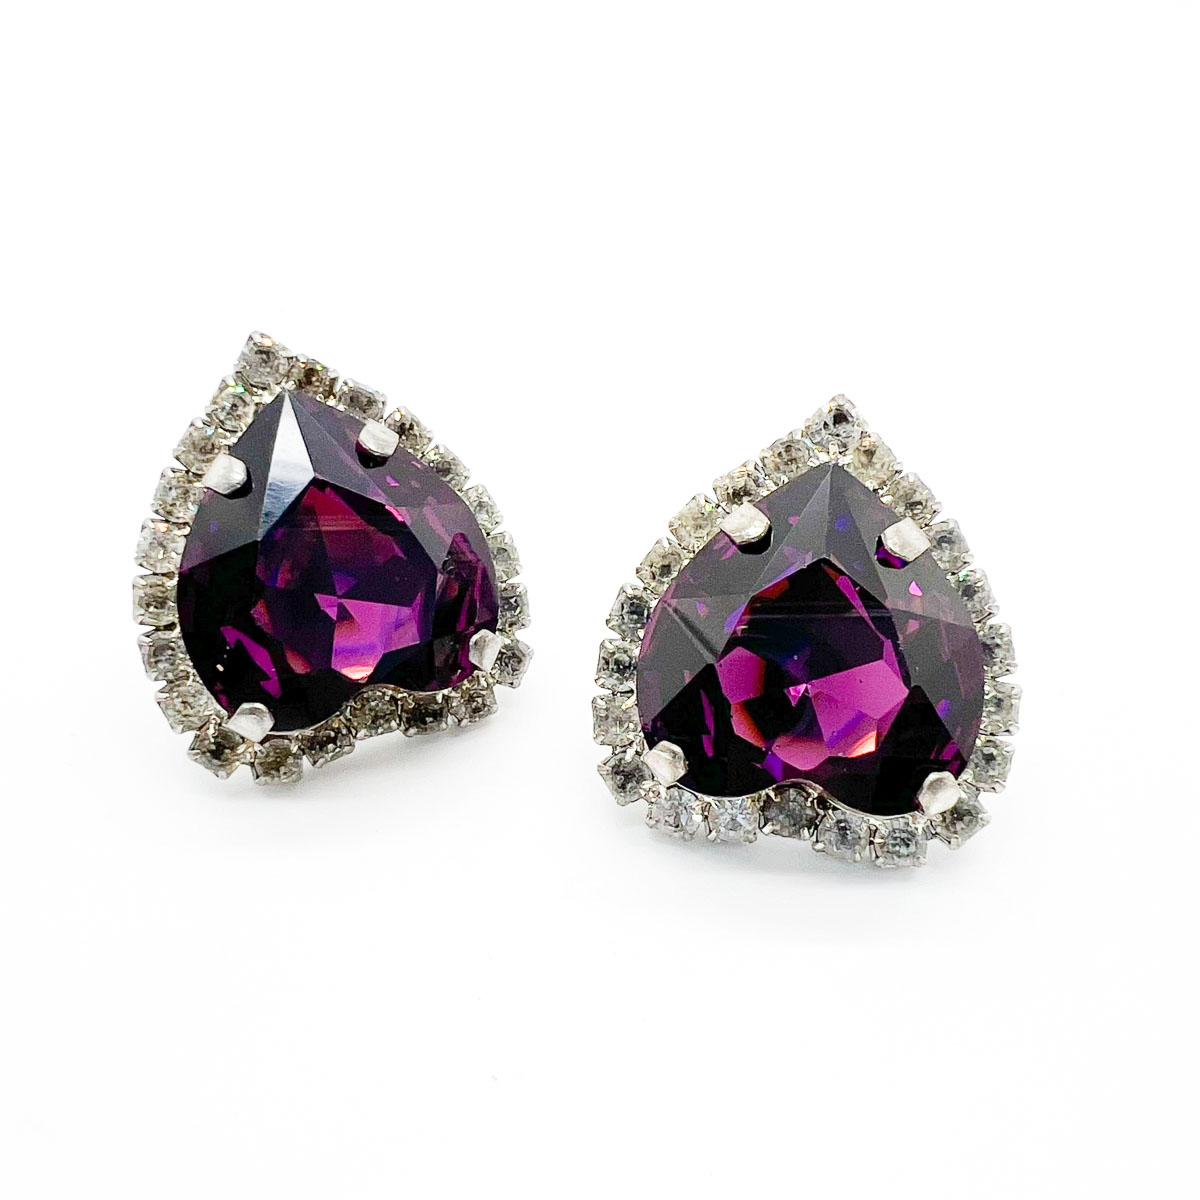 Vintage Amethyst Heart Earrings. Wonderfully glamorous these oversize amethyst crystal heart stones are captivating. Finished with a gallery of white chatons, these sparkling statement clips are a stunning find.
An unsigned beauty. A rare treasure.